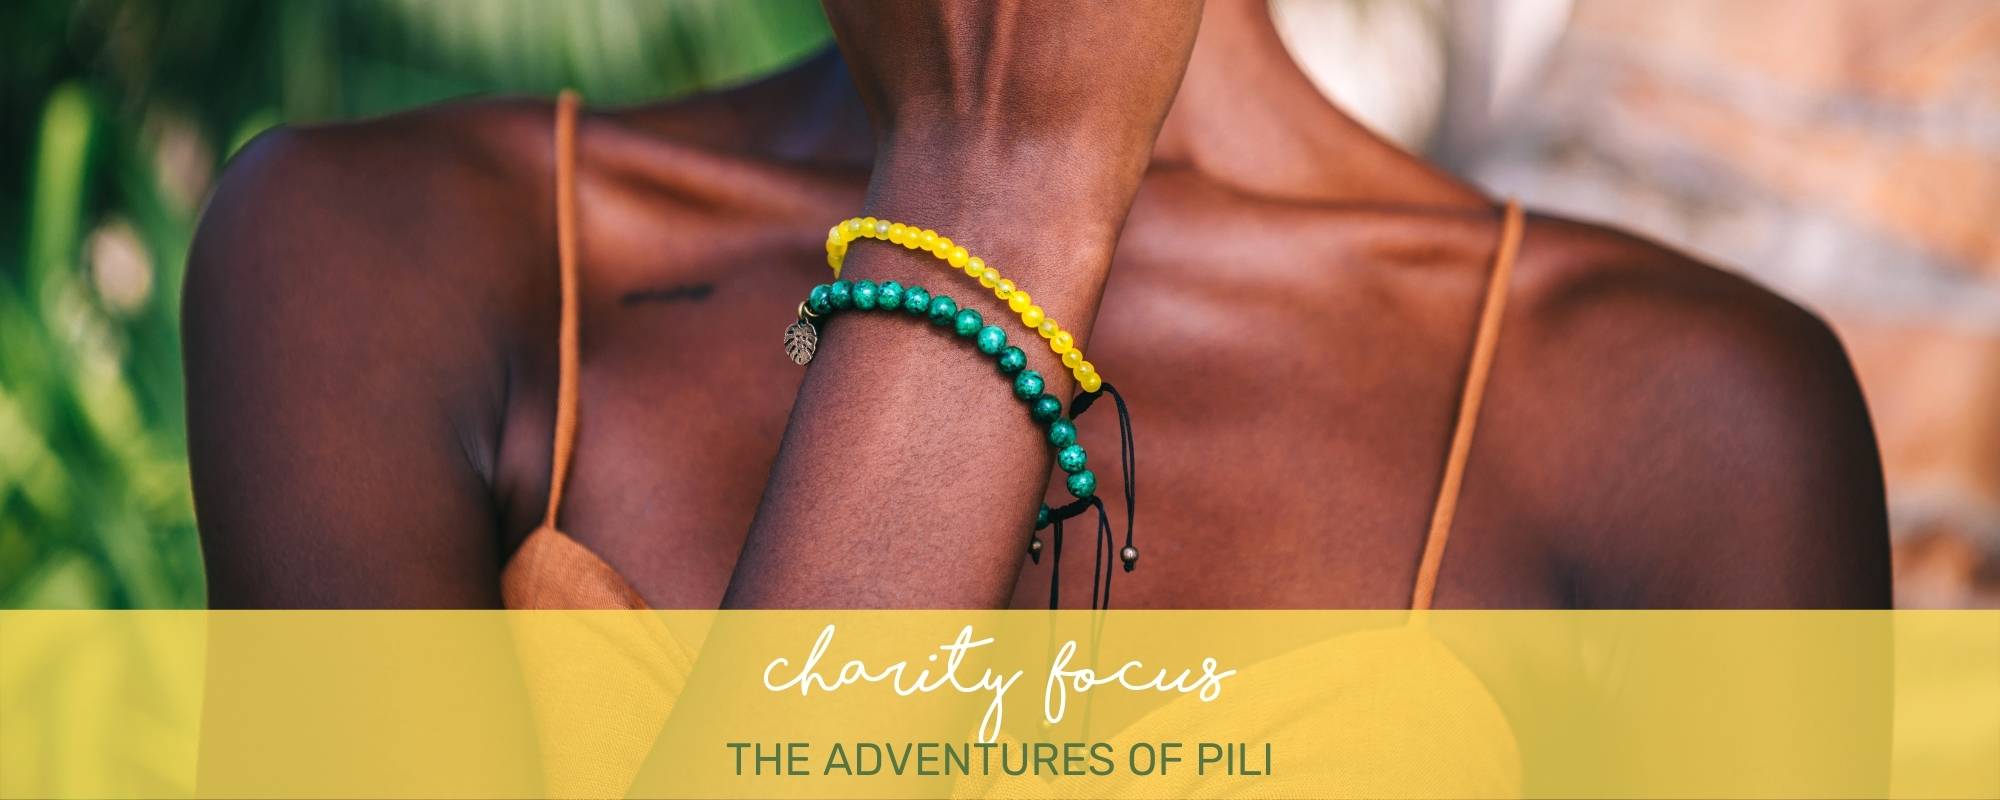 CHARITY FOCUS: THE ADVENTURES OF PILI